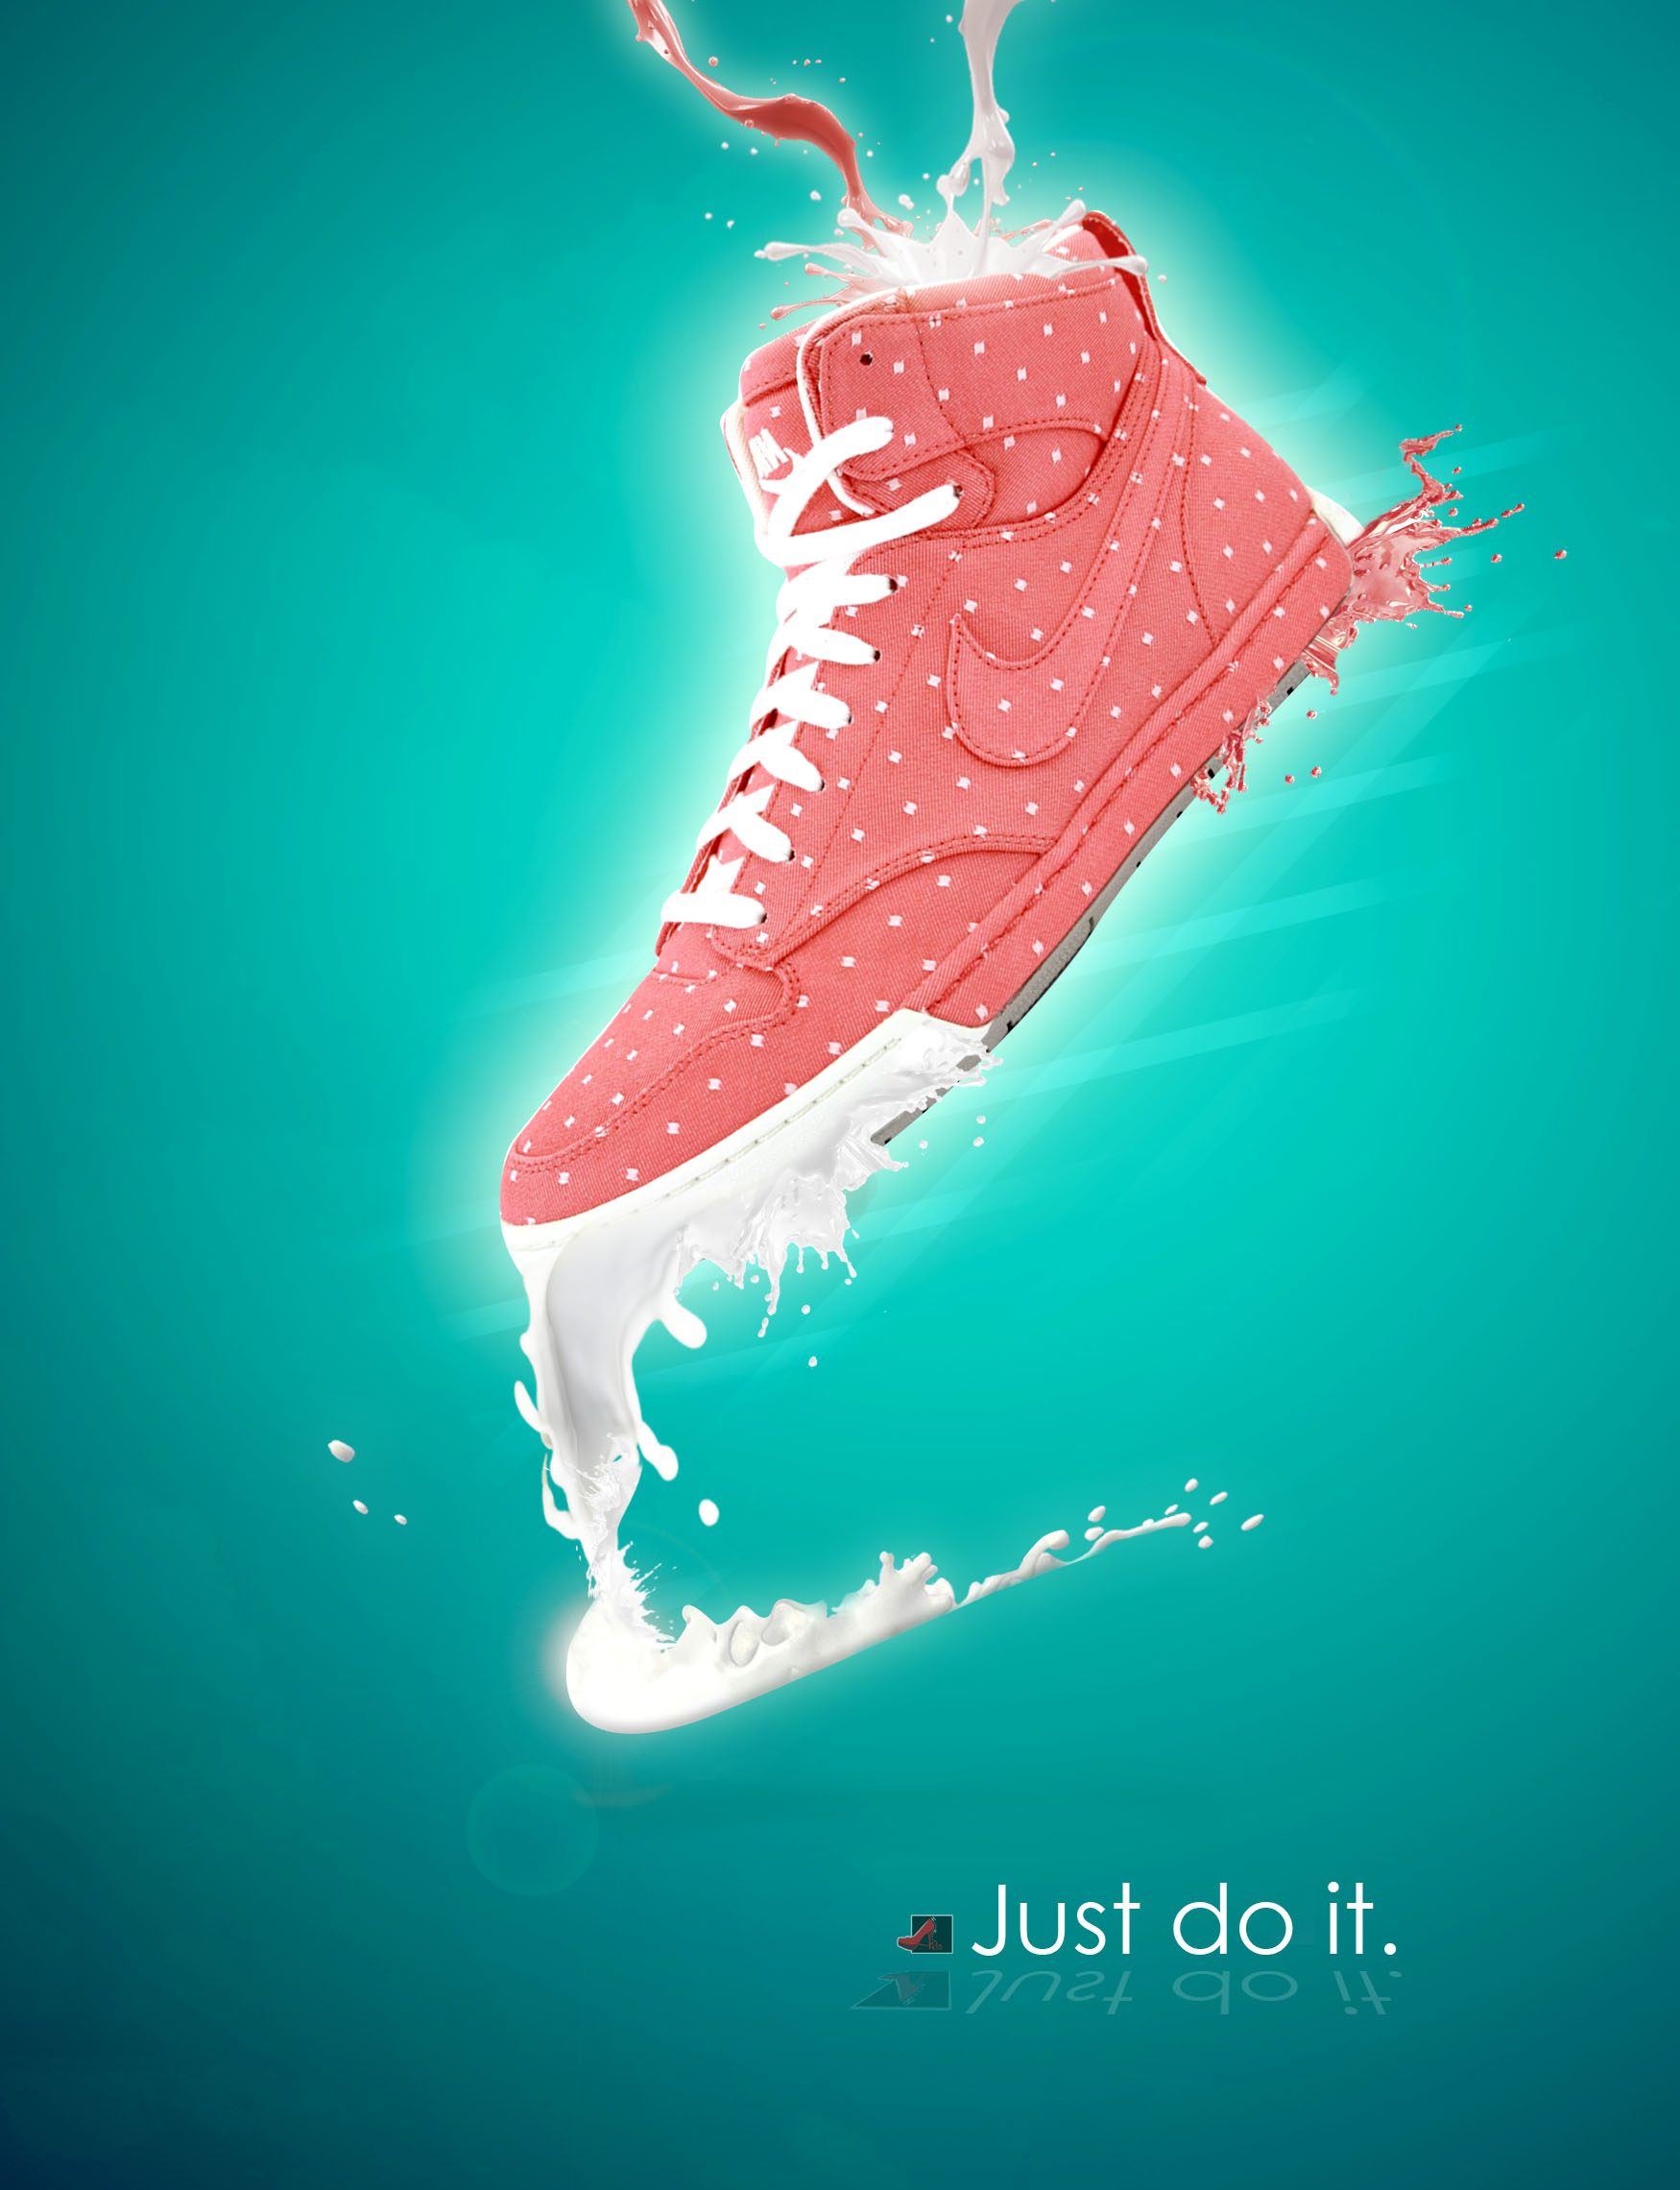 Get Magazine Nike Advertisement Poster Images